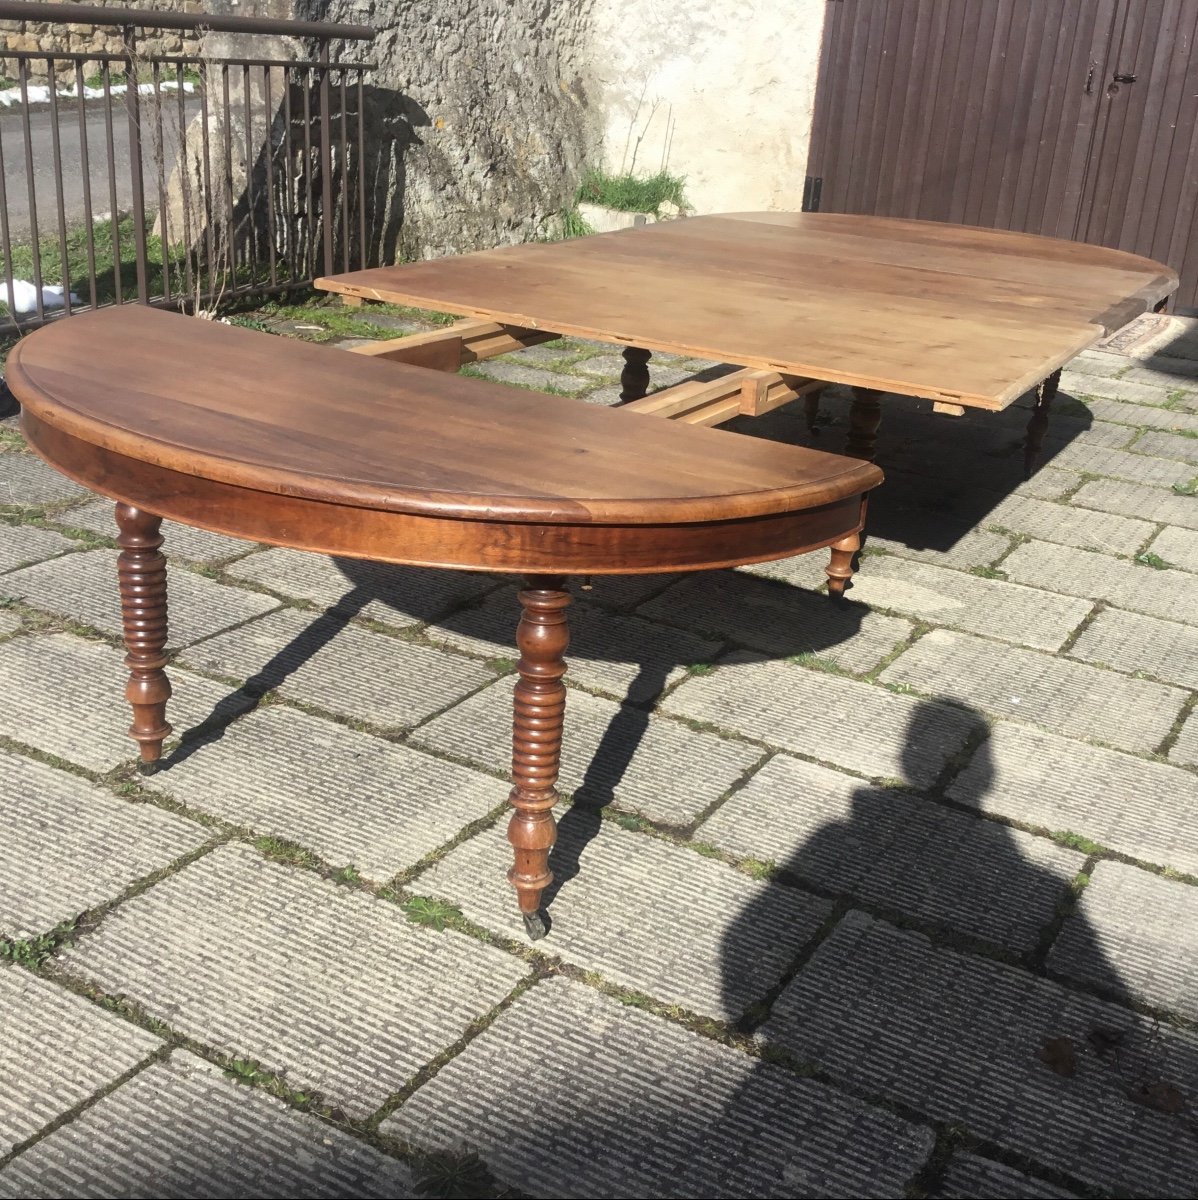 Dining Room Table With 6 Legs And Headband From The 19th Century Restoration Period -photo-2